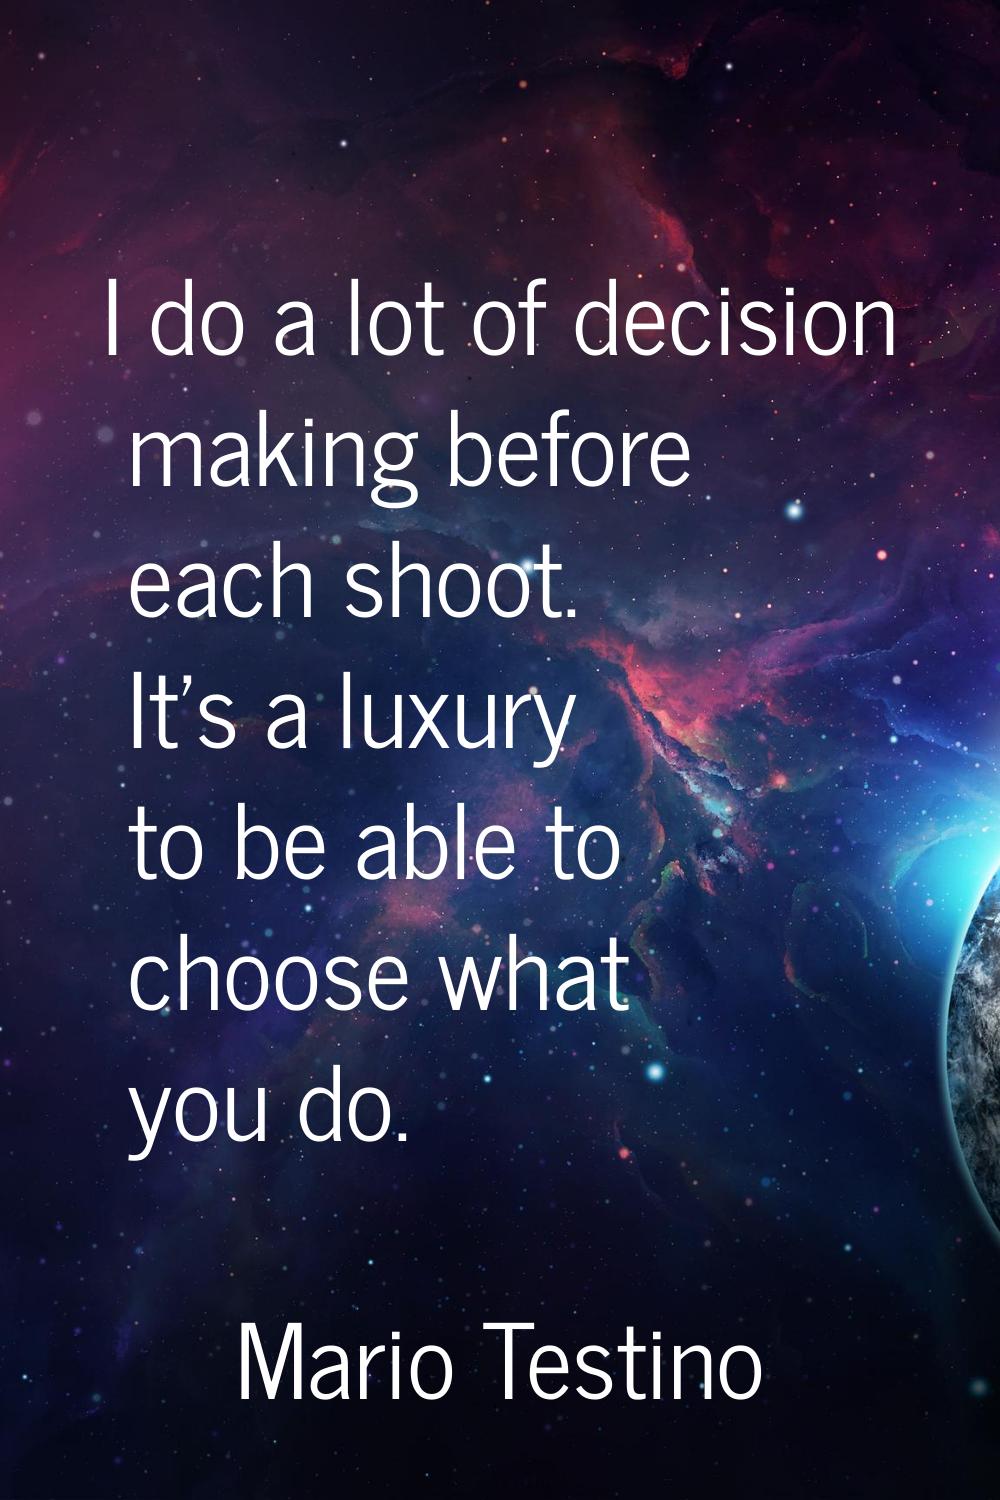 I do a lot of decision making before each shoot. It's a luxury to be able to choose what you do.